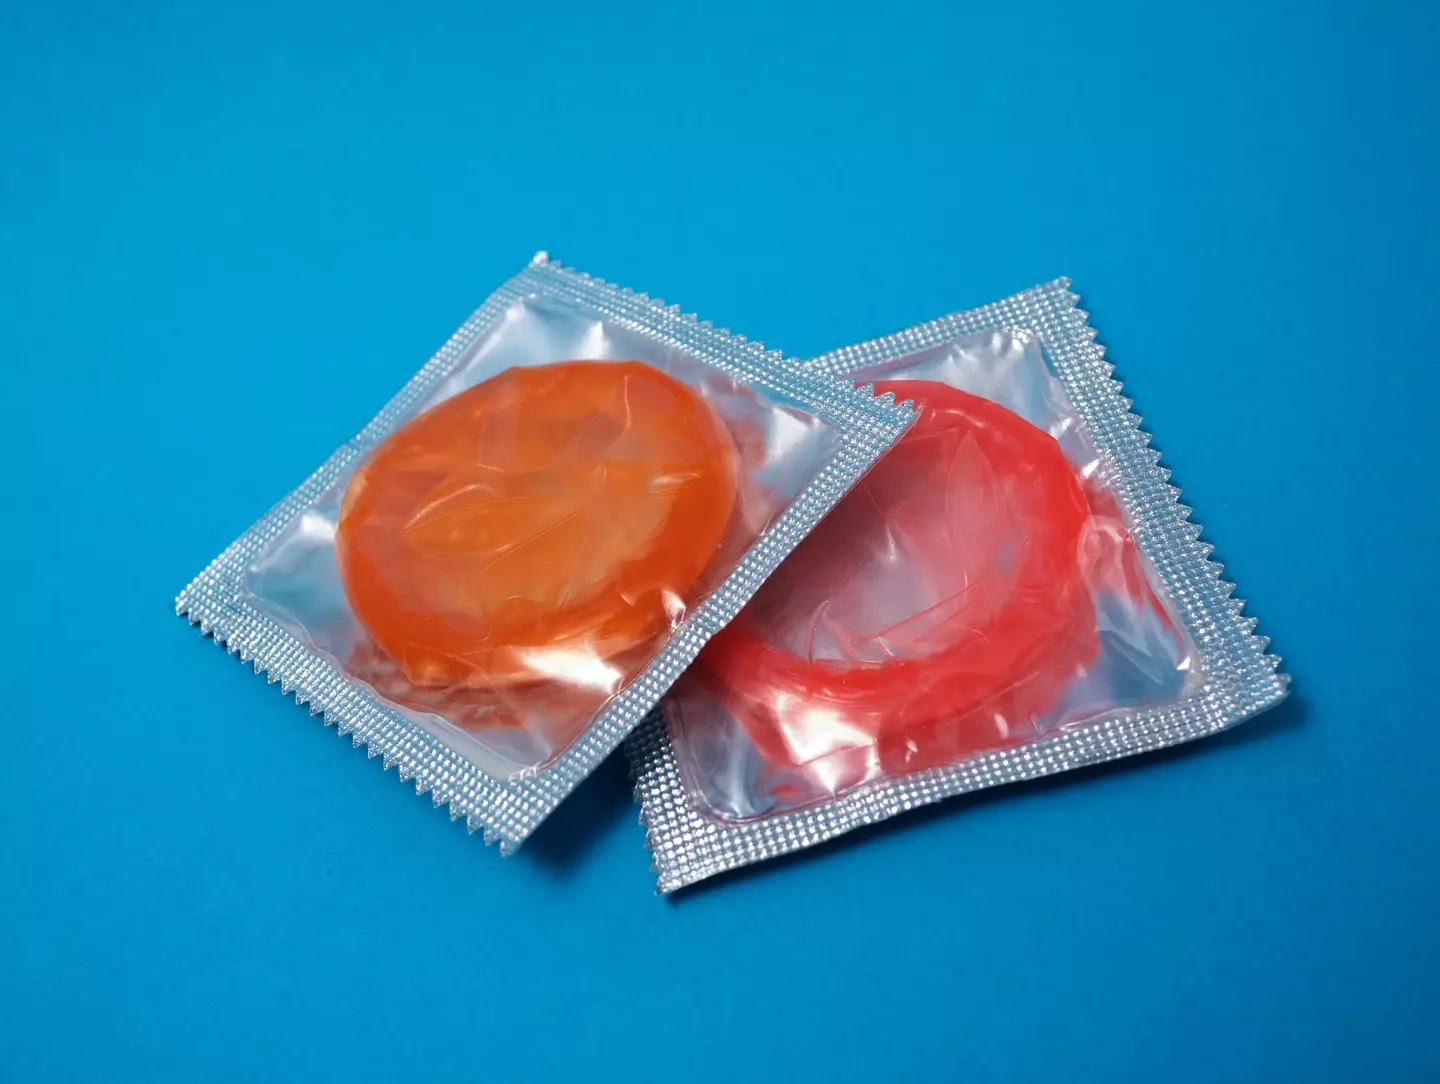 Currently, the only ‘on-demand’ contraceptives which are available in the UK are condoms, diaphragms, plus the hormone-free Phexxi gel in the US (Reproductive Health Supplies Coalition on Unsplash).